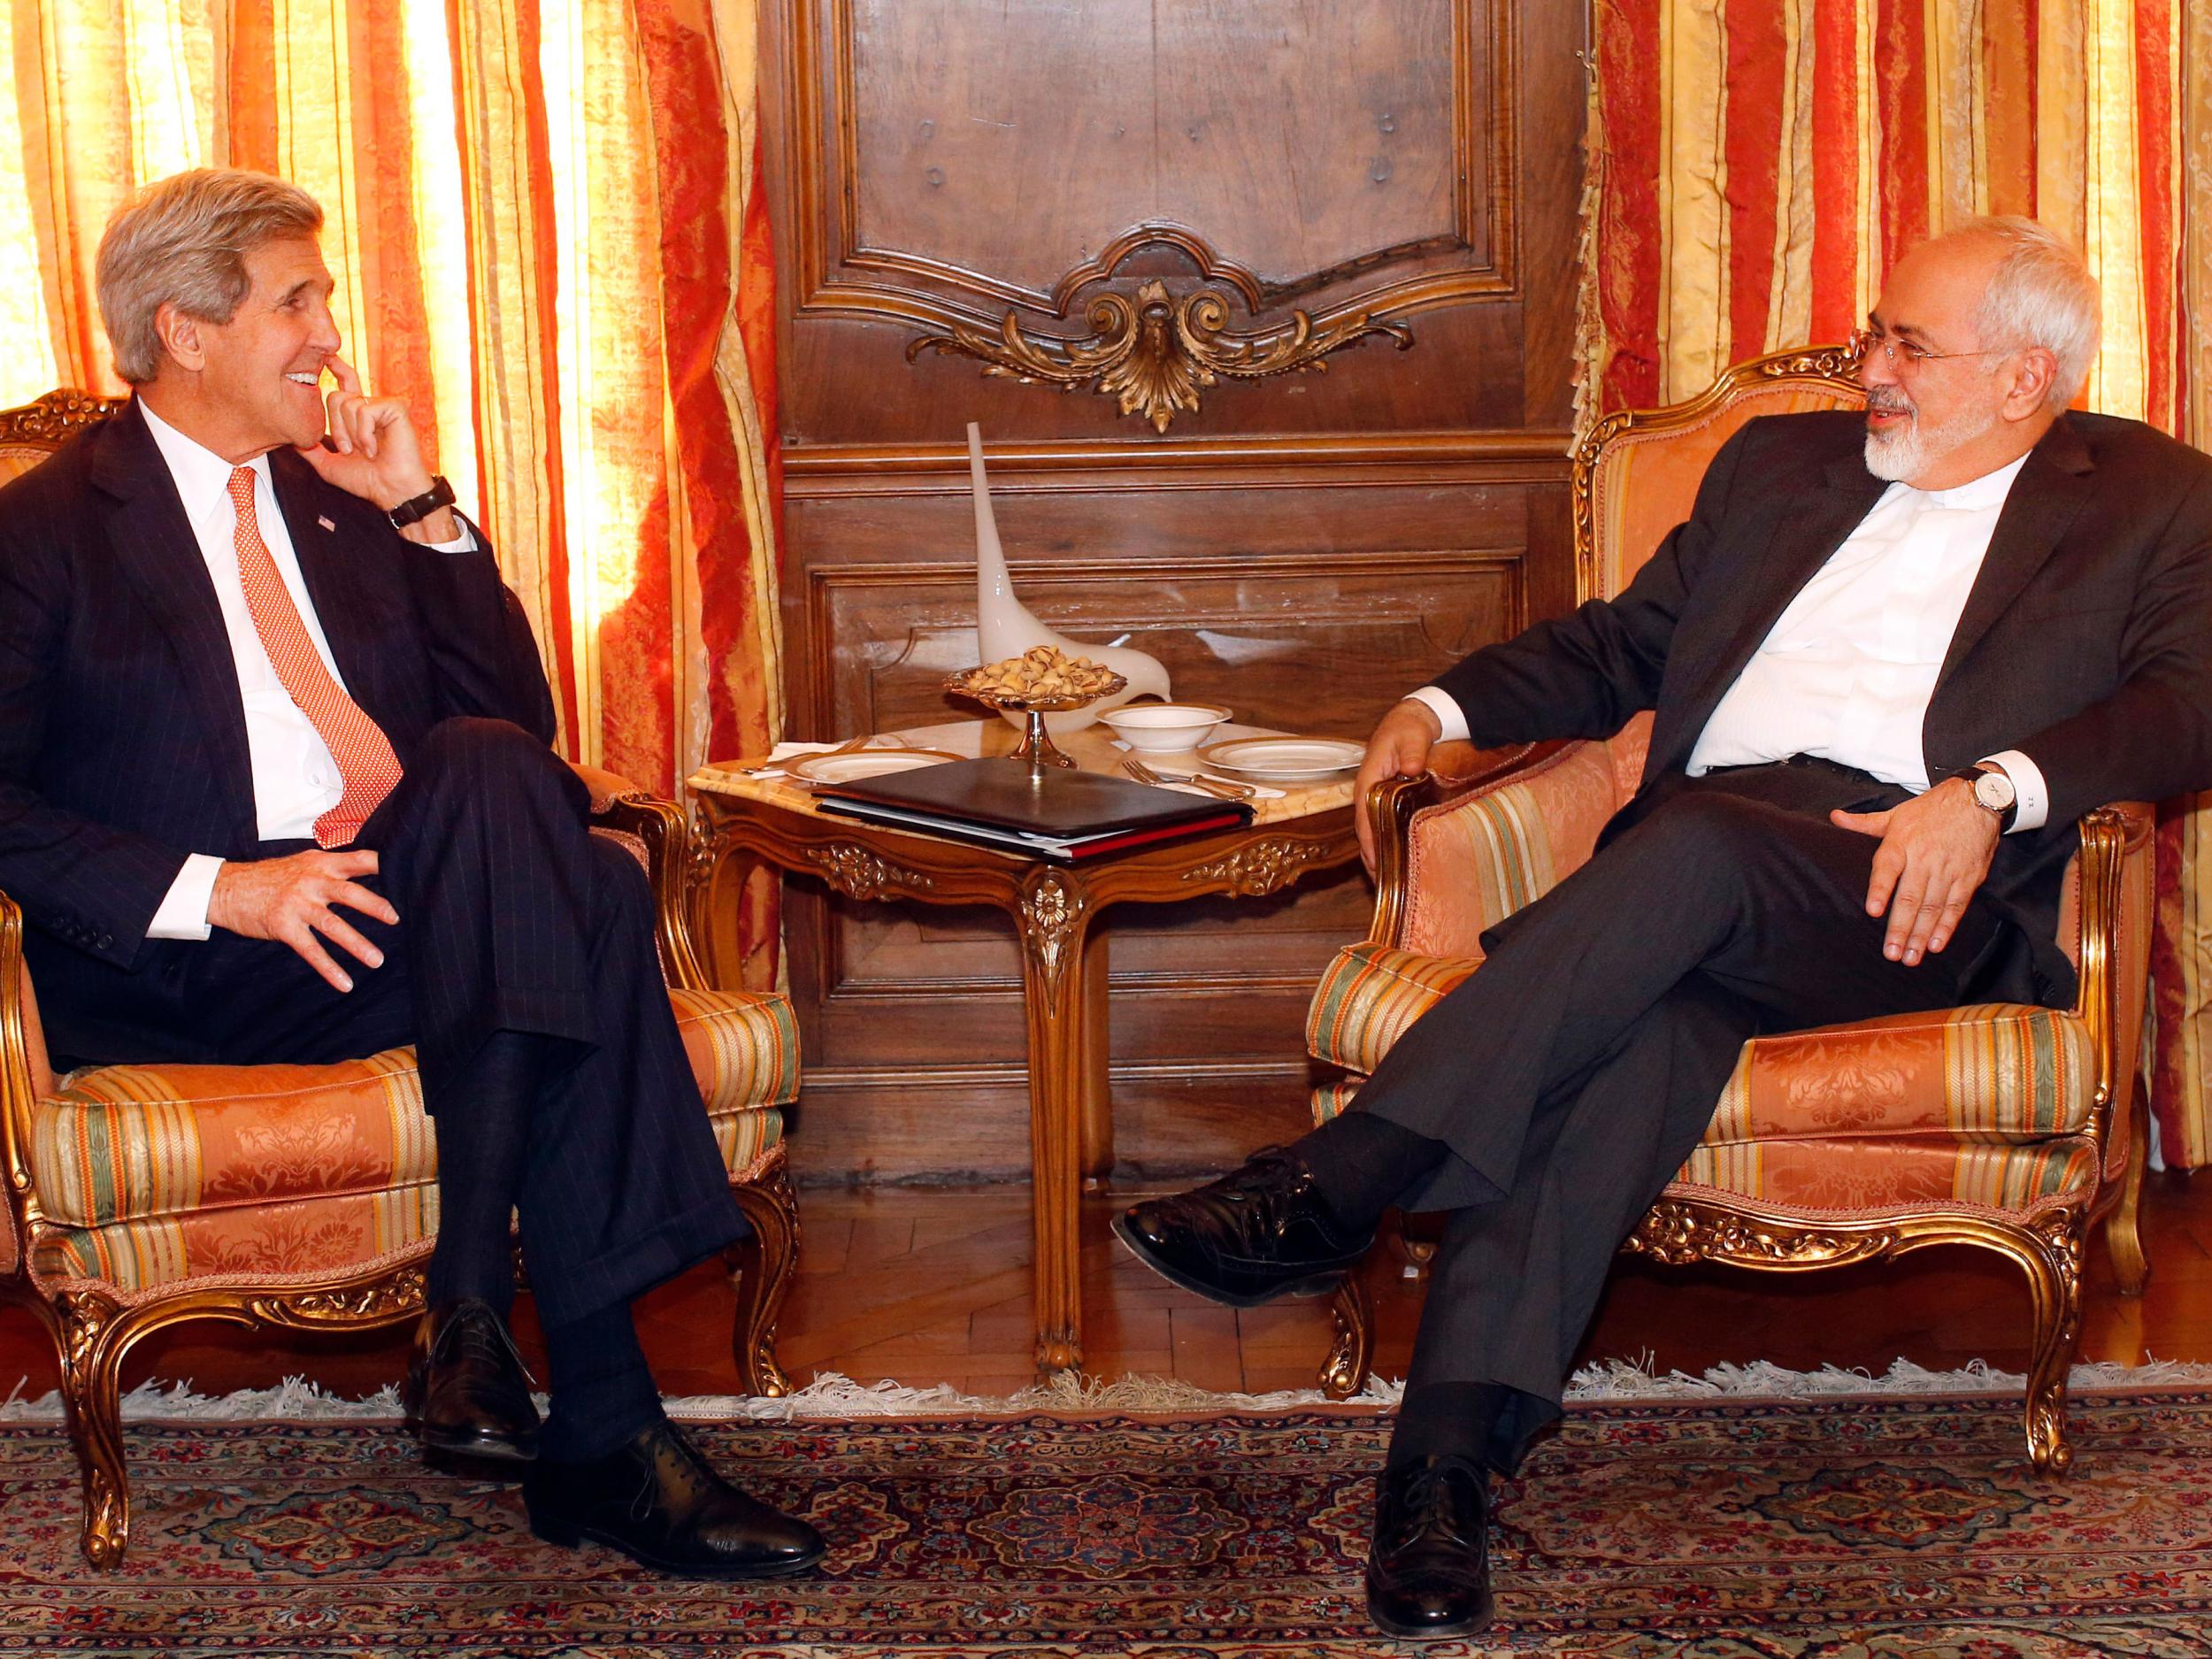 U.S. Secretary of State John Kerry meets with Iranian Foreign Minister Mohammad Javad Zarif at the UN in April 2015 attempting to make progress in talks on a long-term nuclear deal